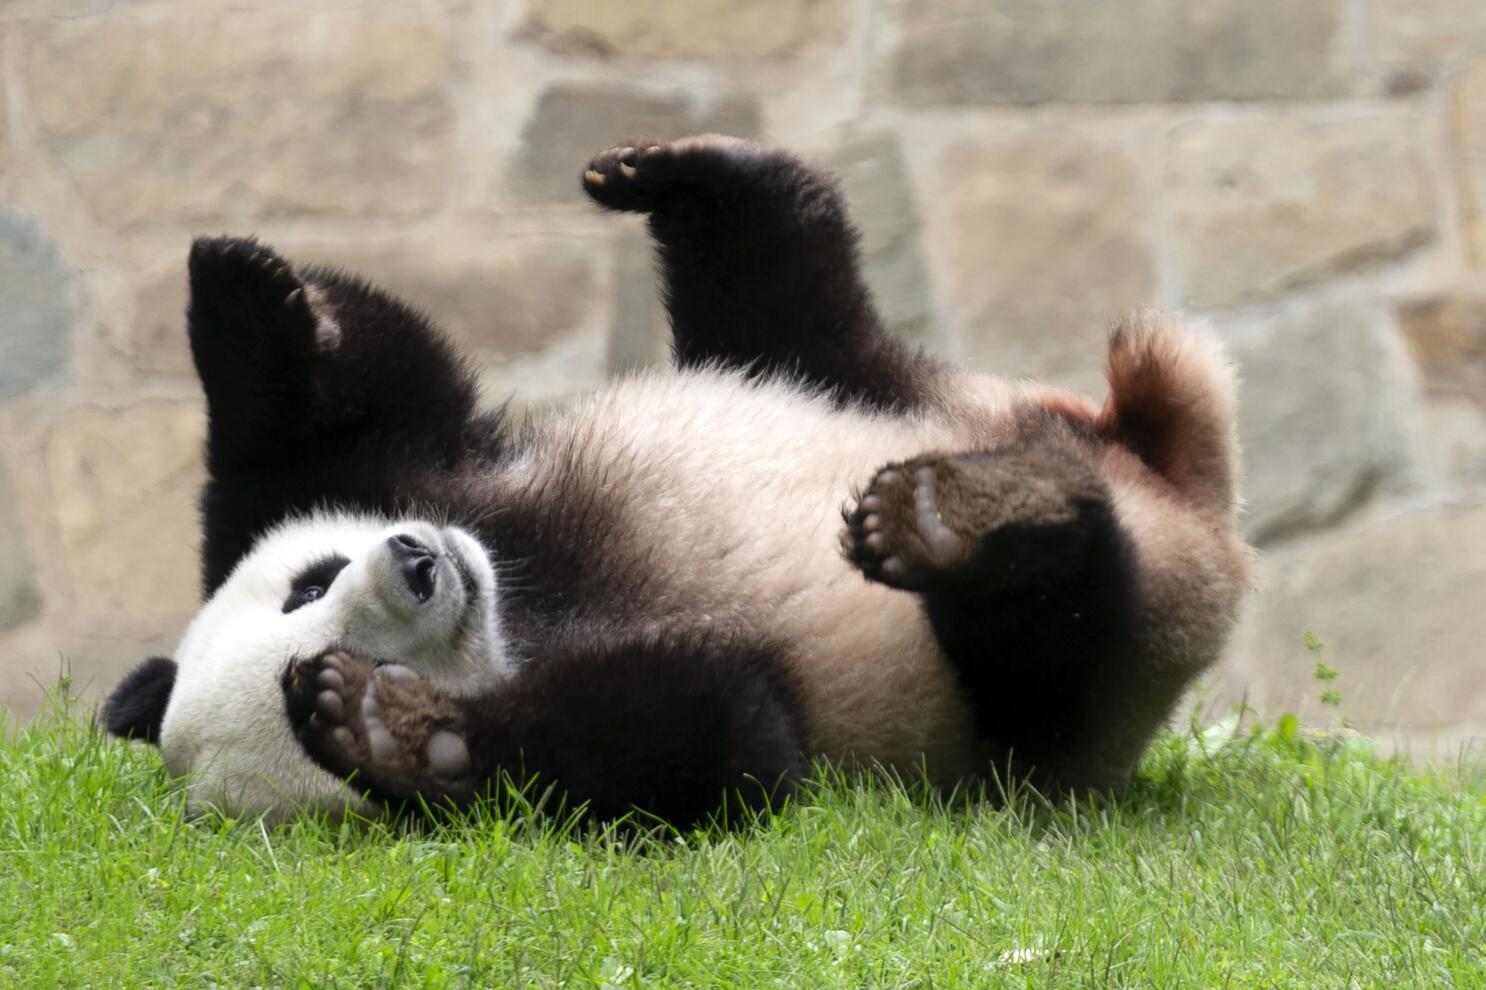 Giant panda guide: why they're threatened, how they raise young